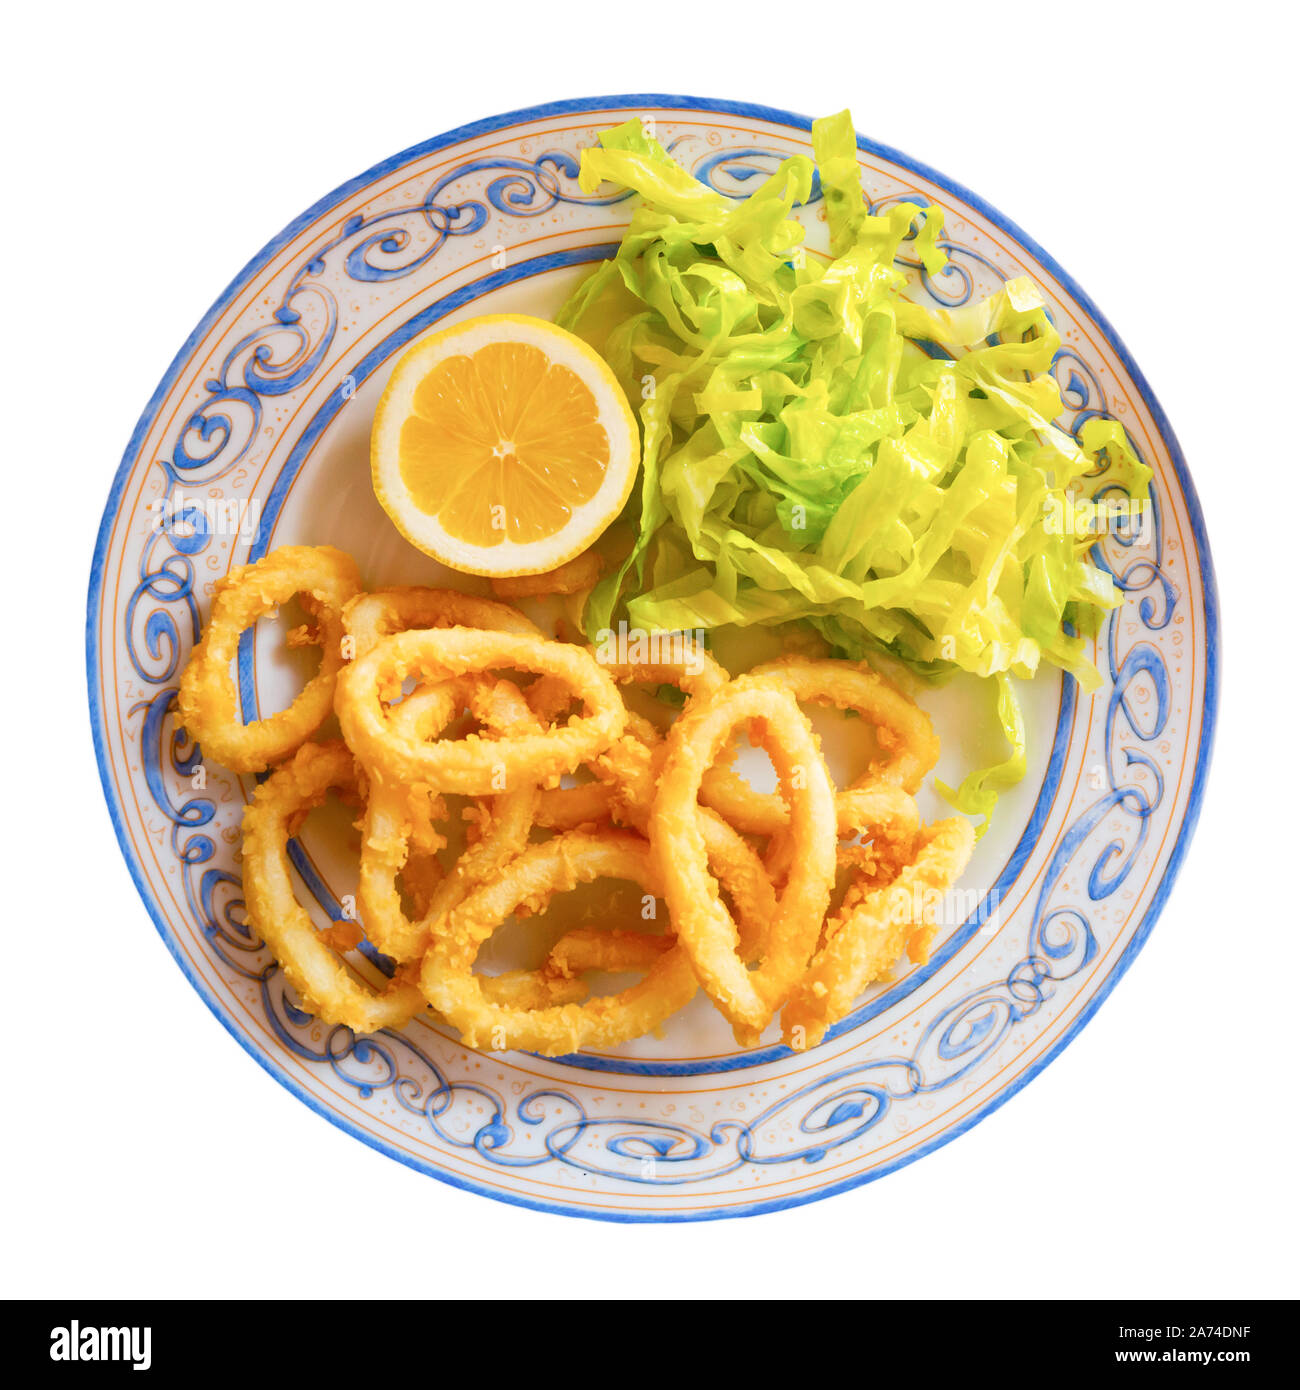 Calamares a la romana fried squid on plate. Traditional spanish dish. Isolated over white background Stock Photo